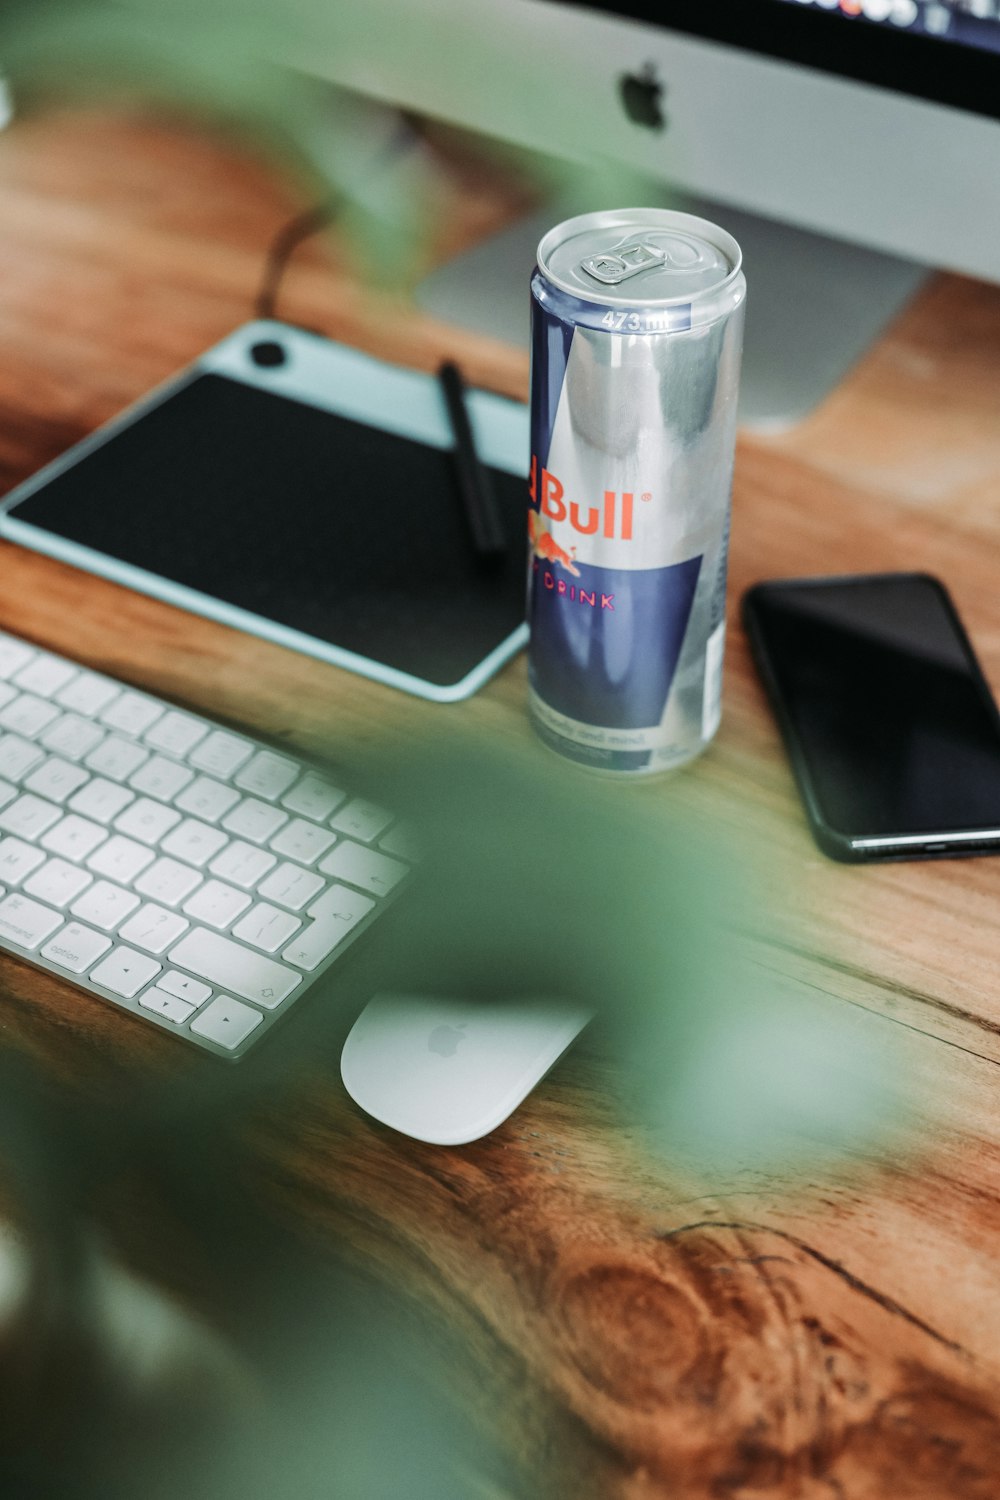 Red Bull can in between smartphone and writing pad on table